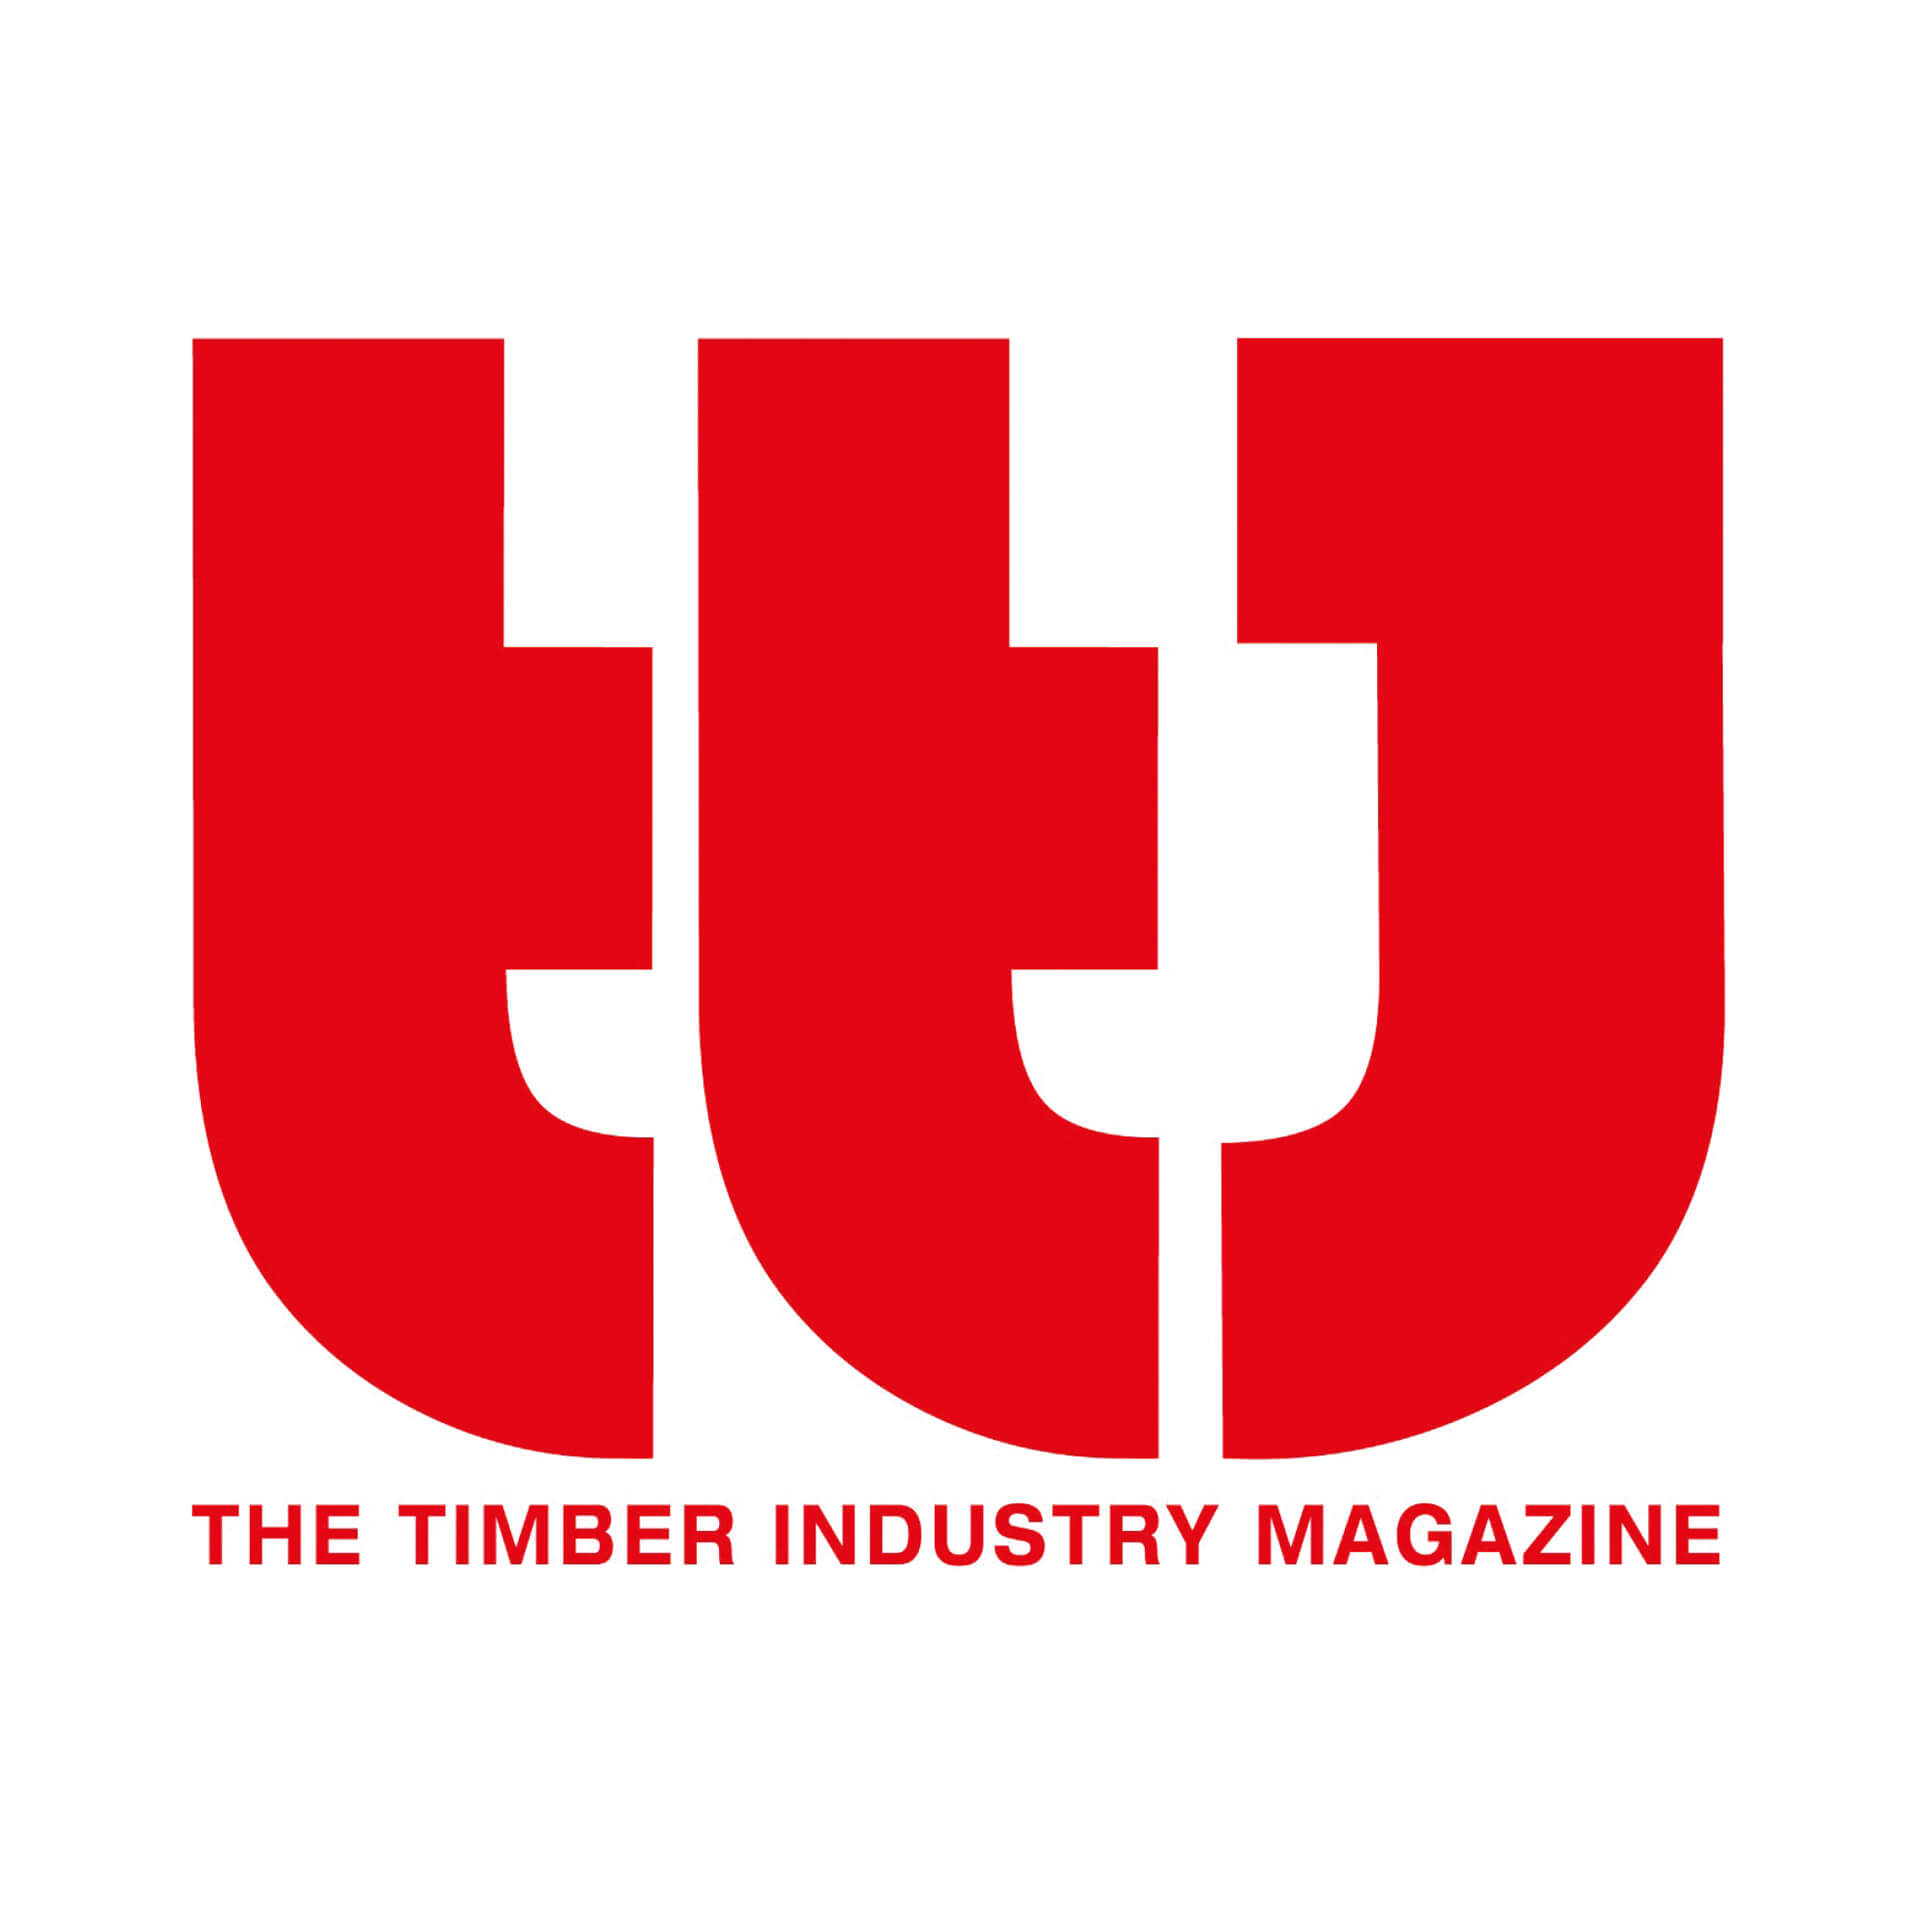 The Timber Industry Magazine